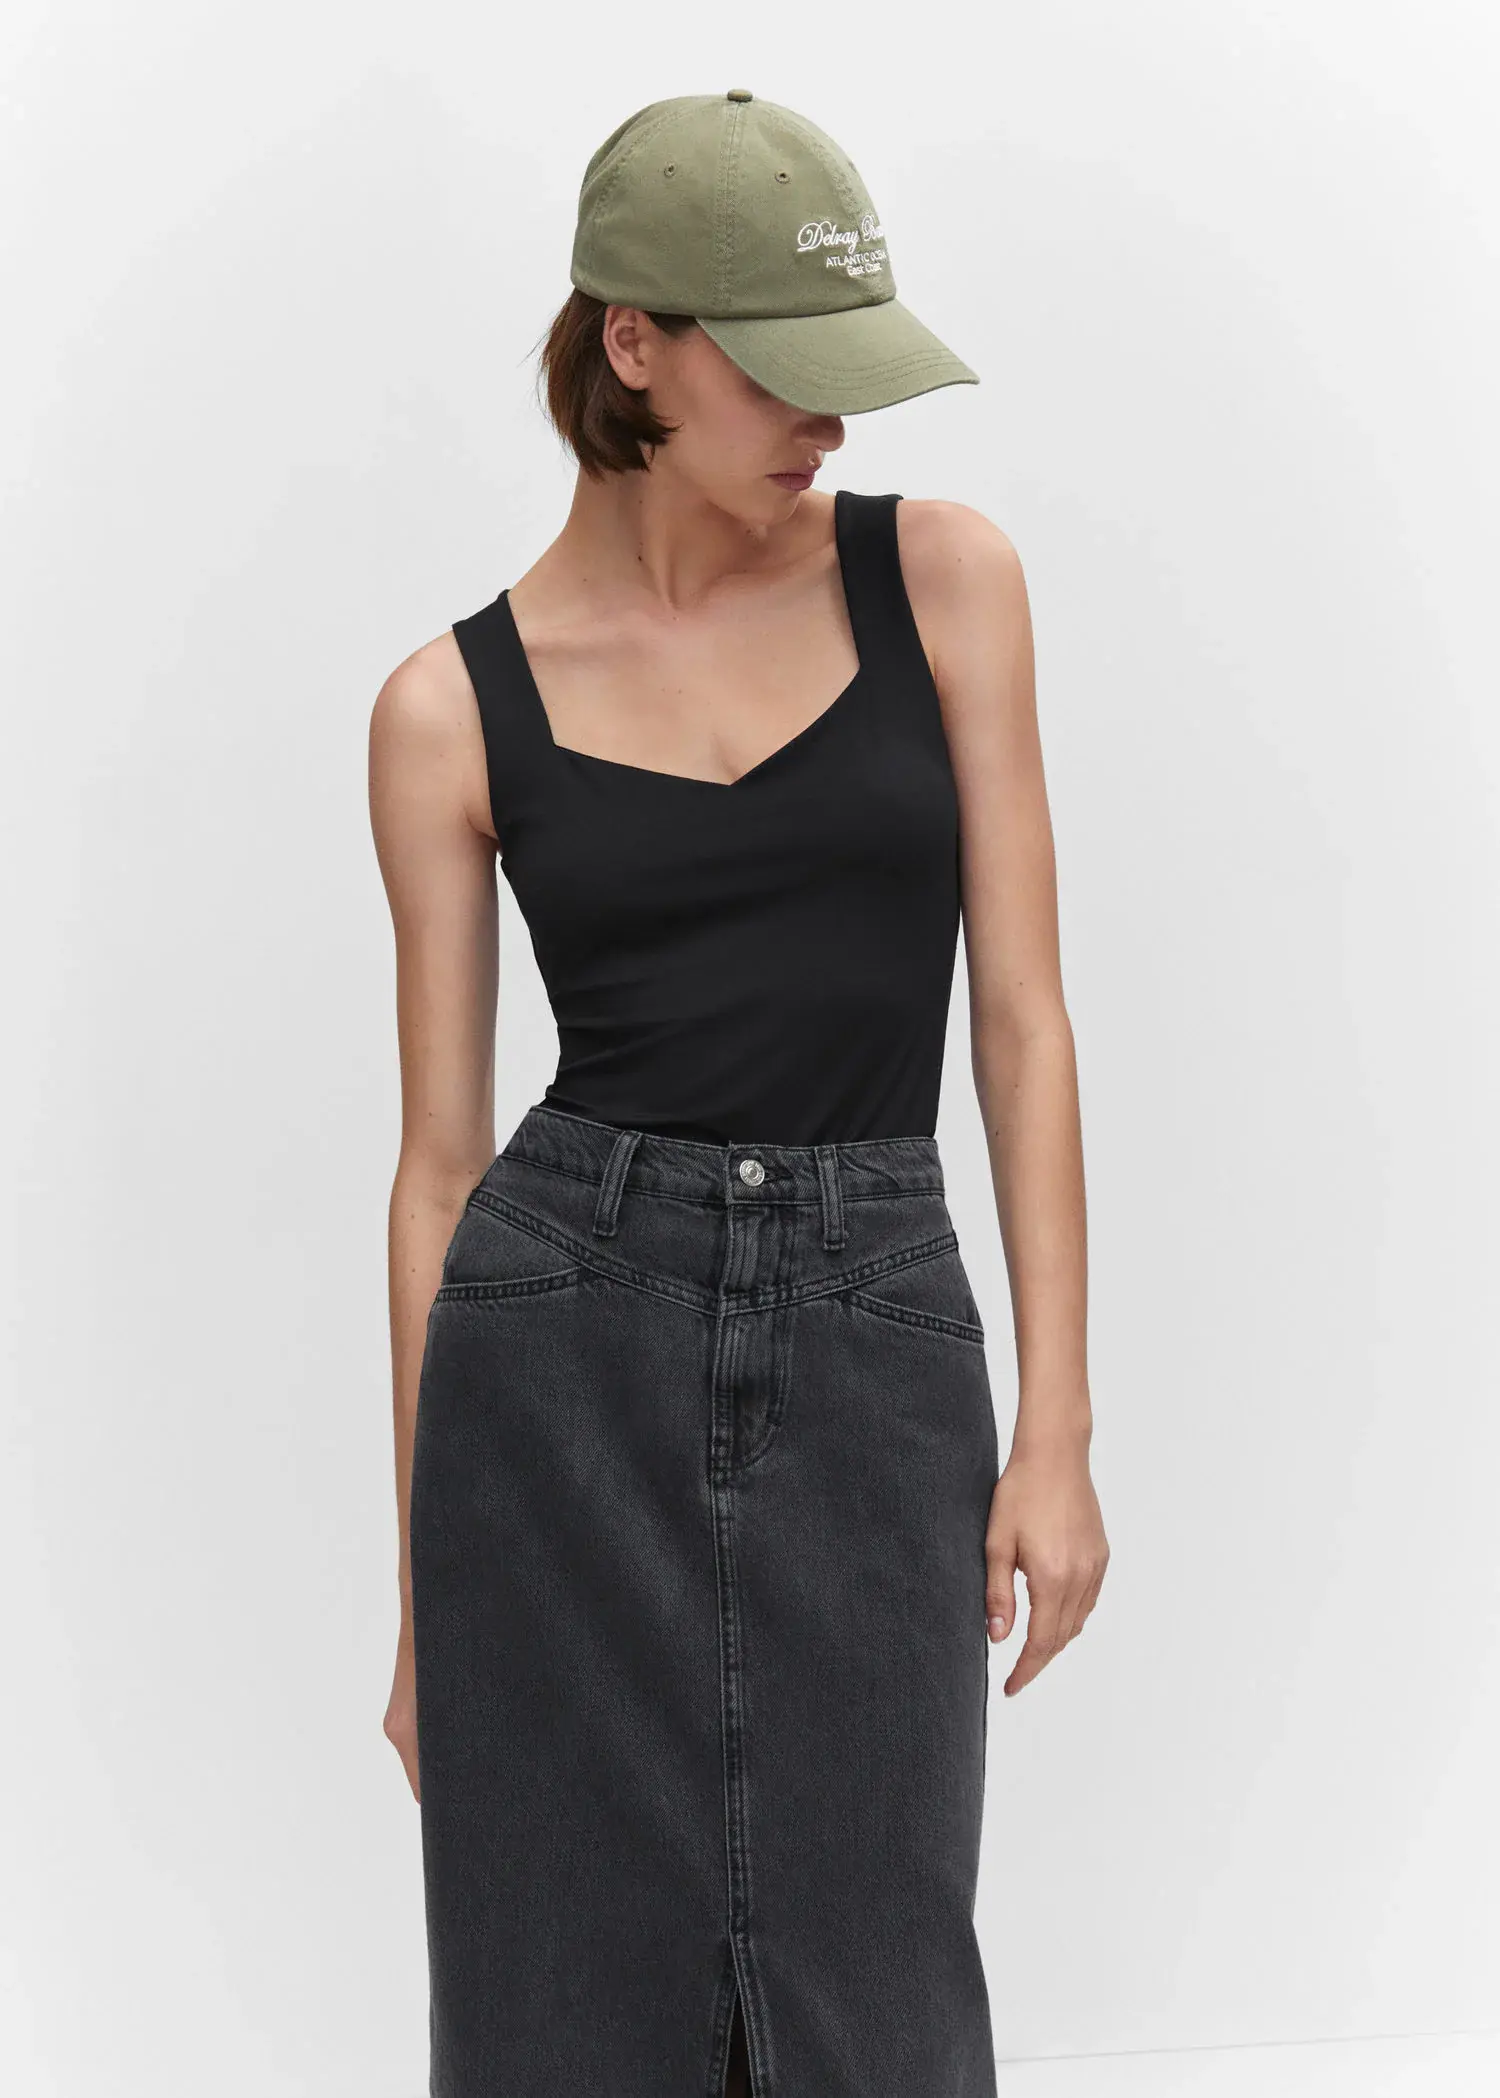 Mango Open elastic top. a woman wearing a black tank top and a hat. 